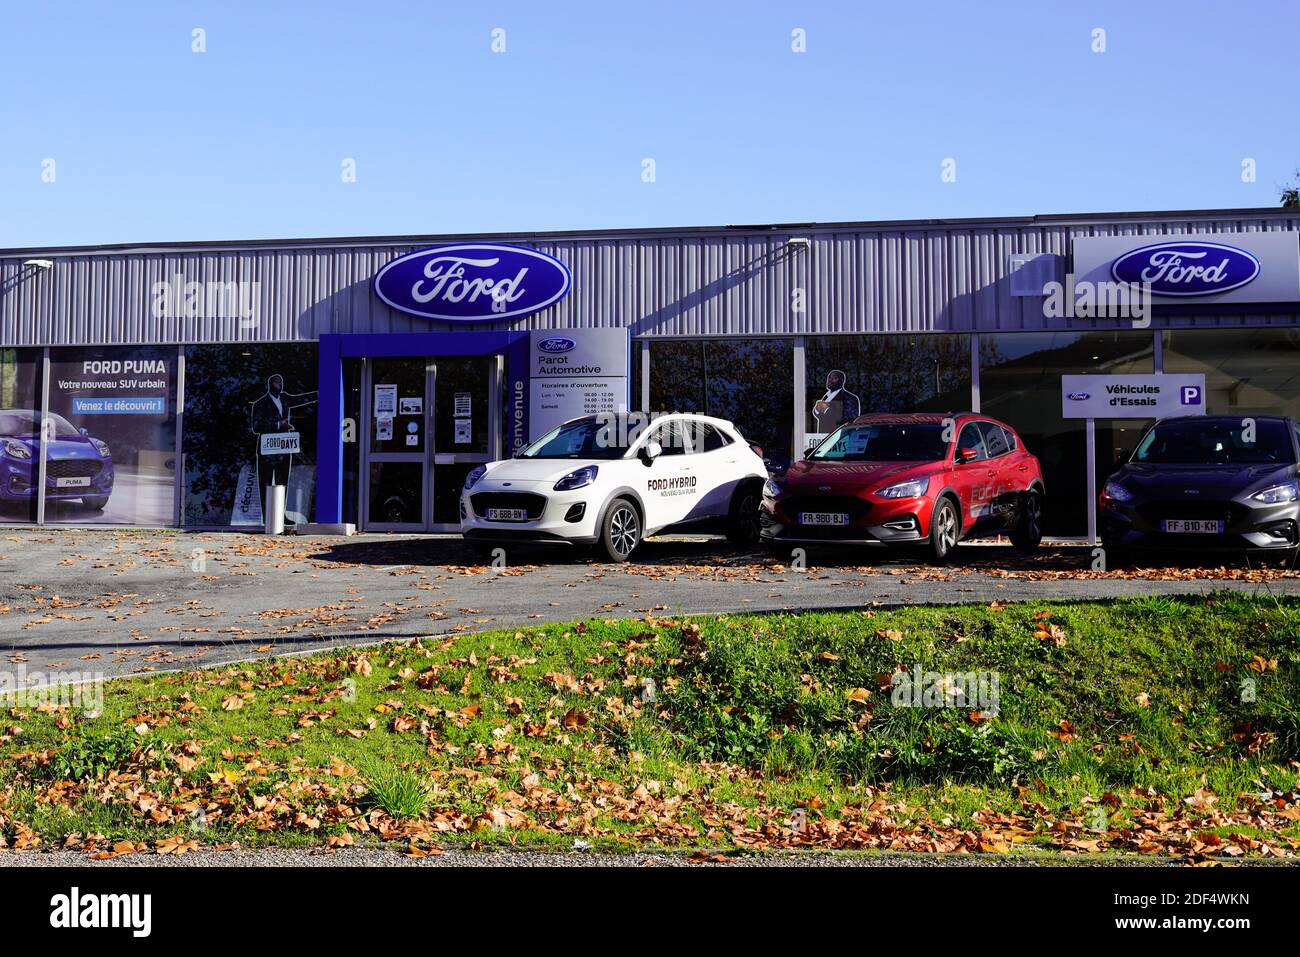 Bordeaux , Aquitaine France - 12 01 2020 : Ford Dealership car sign text  and logo store of service Automobile Stock Photo - Alamy